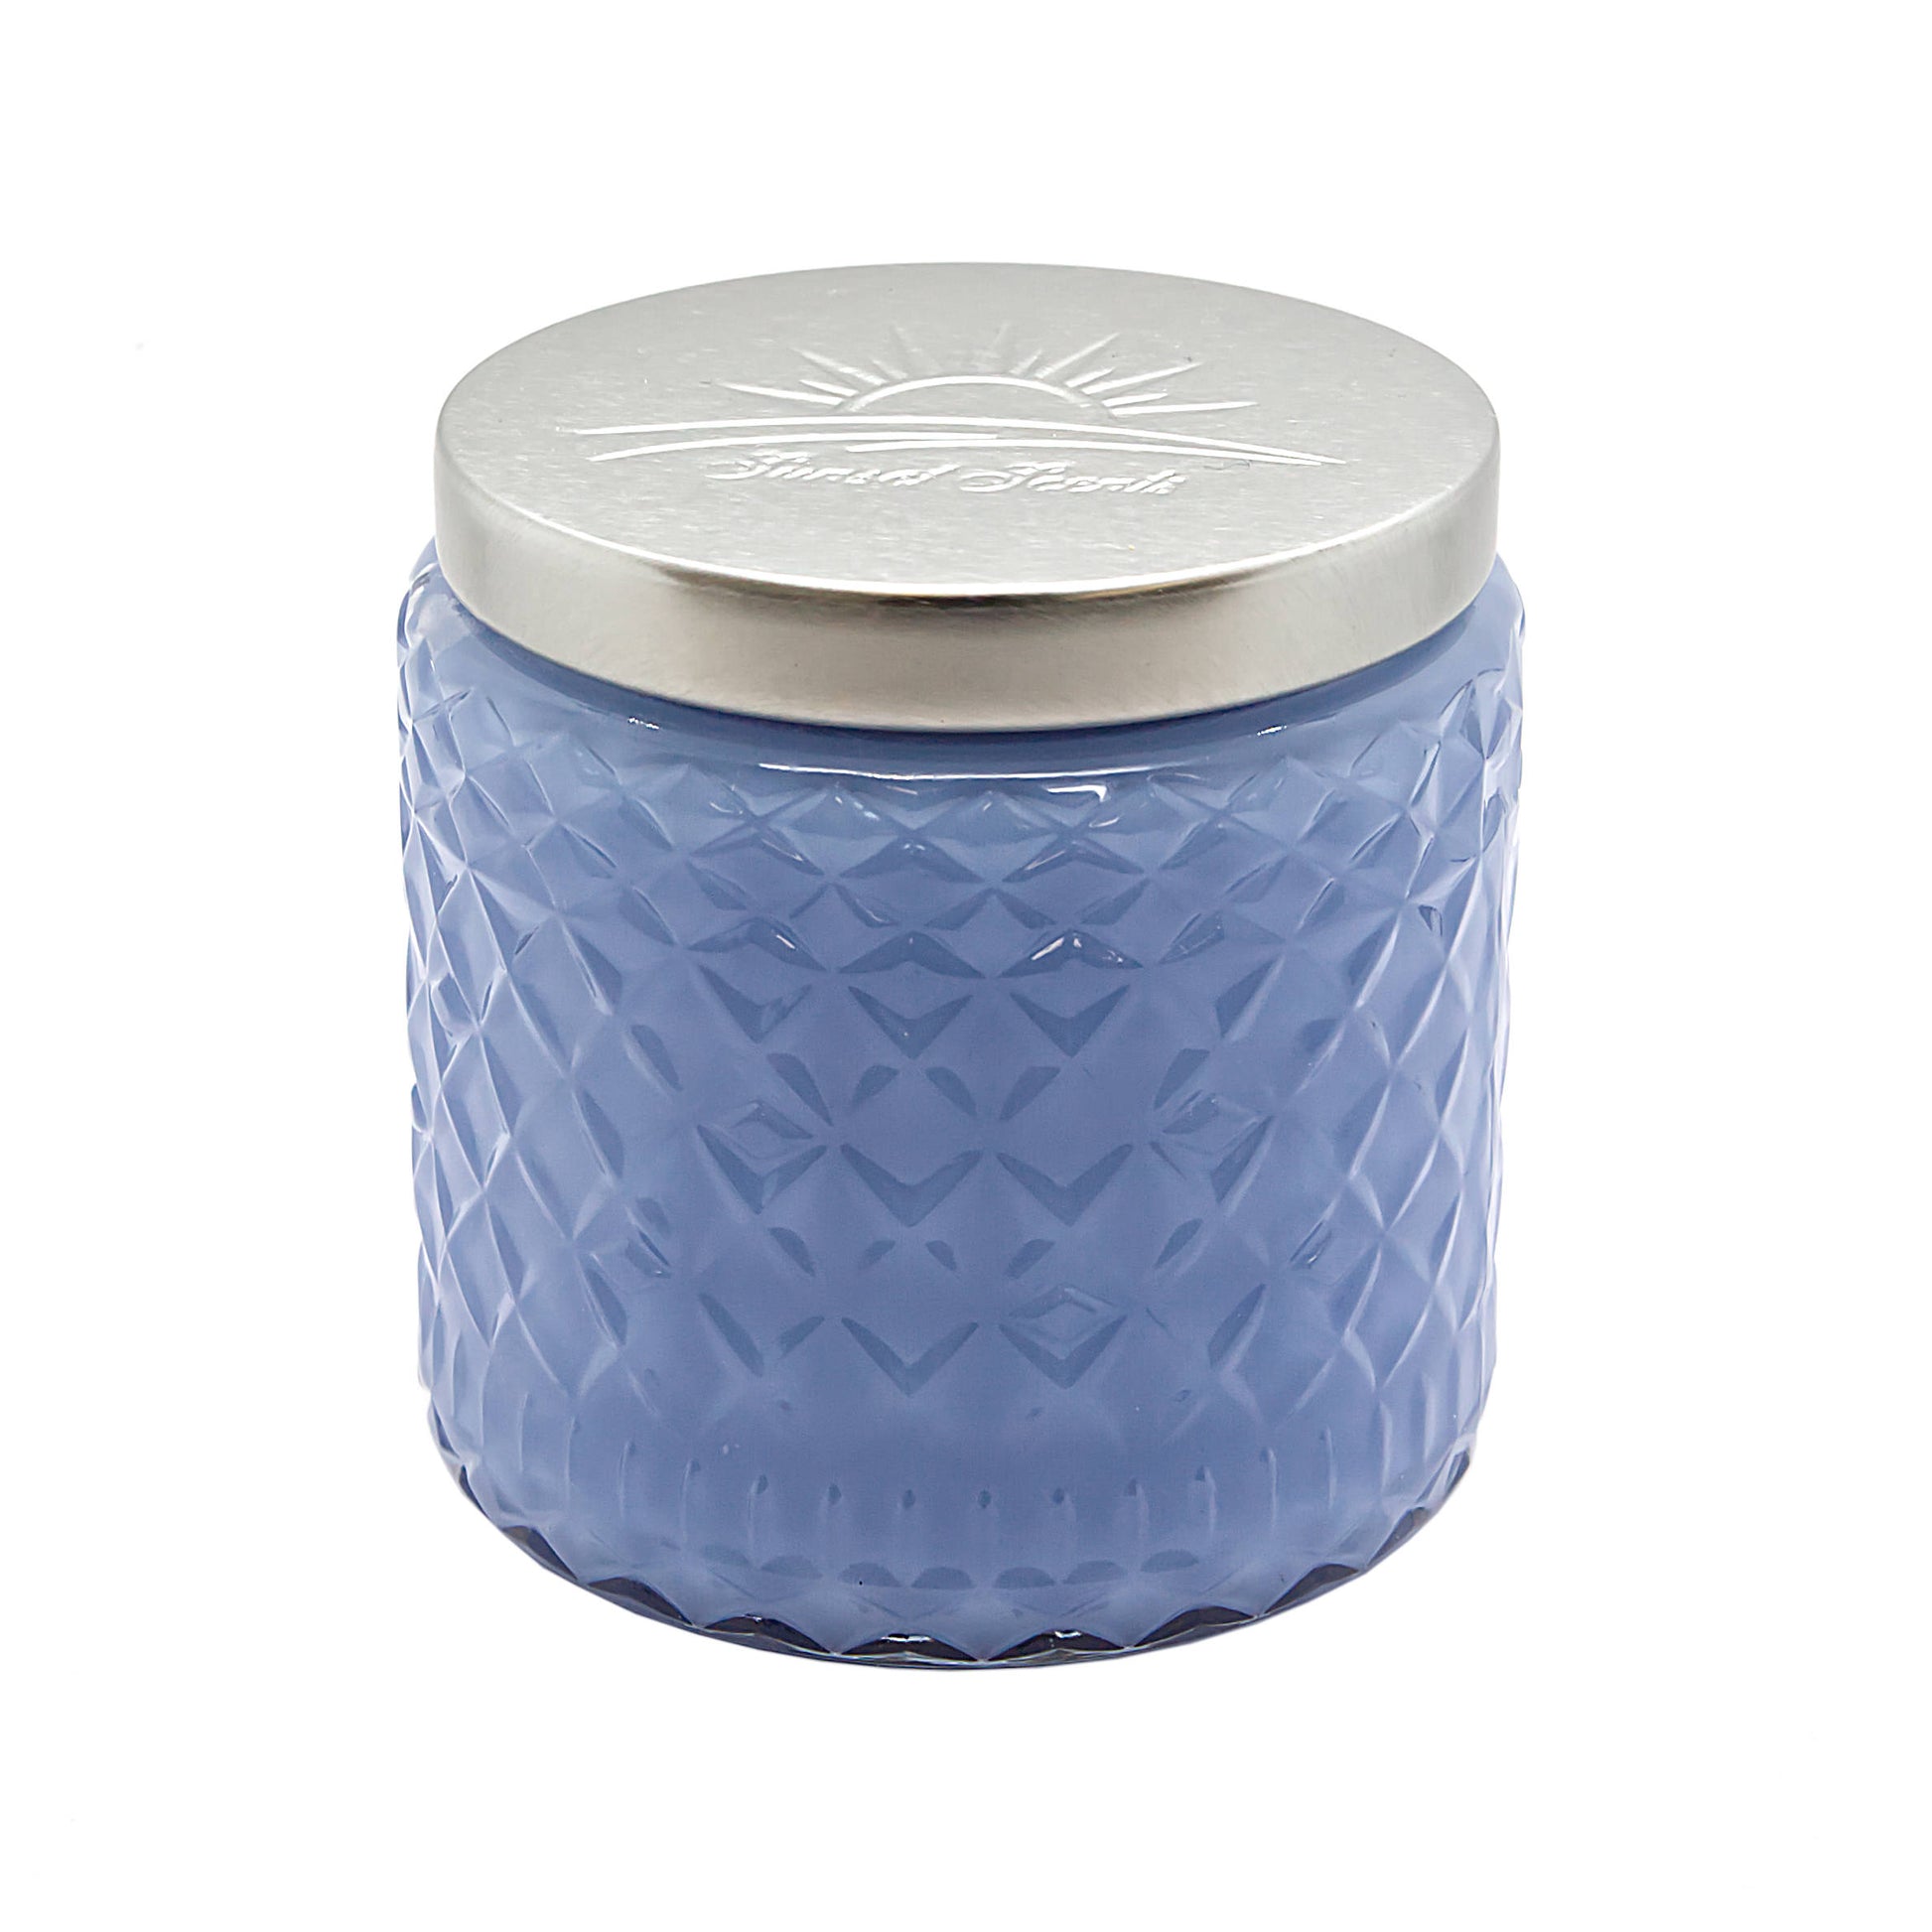 Rainshower Scented Candle 16oz